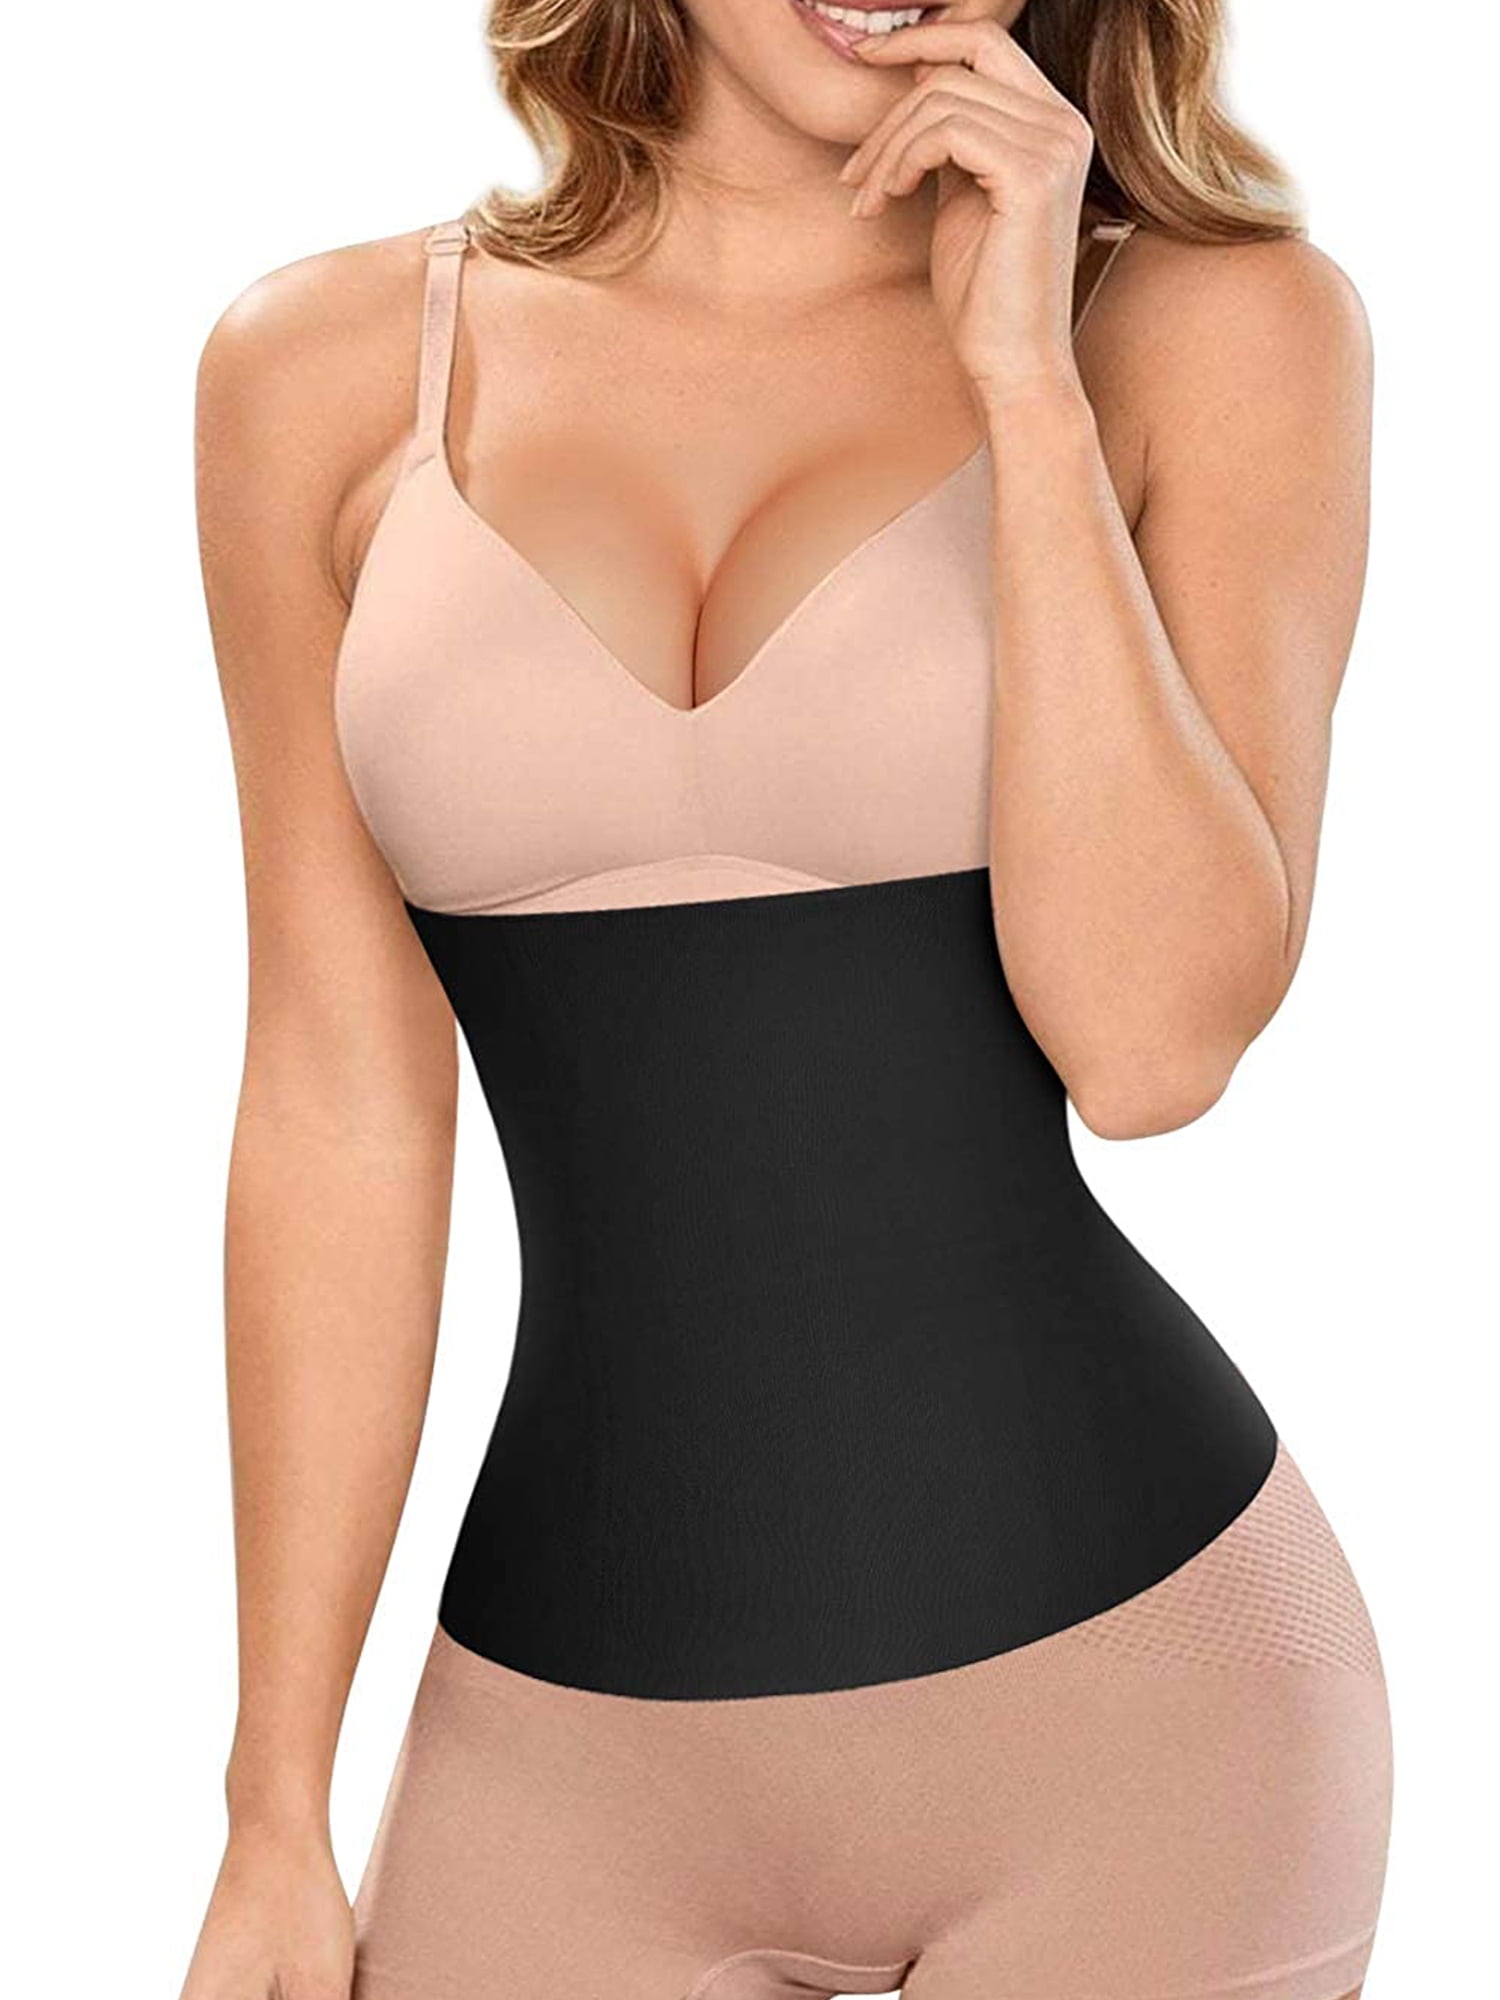 Buy Spanx Higher Power Panties - Targeted Shapewear Durable, Breathable Tummy  Control, Cafe Au Lait, Large at